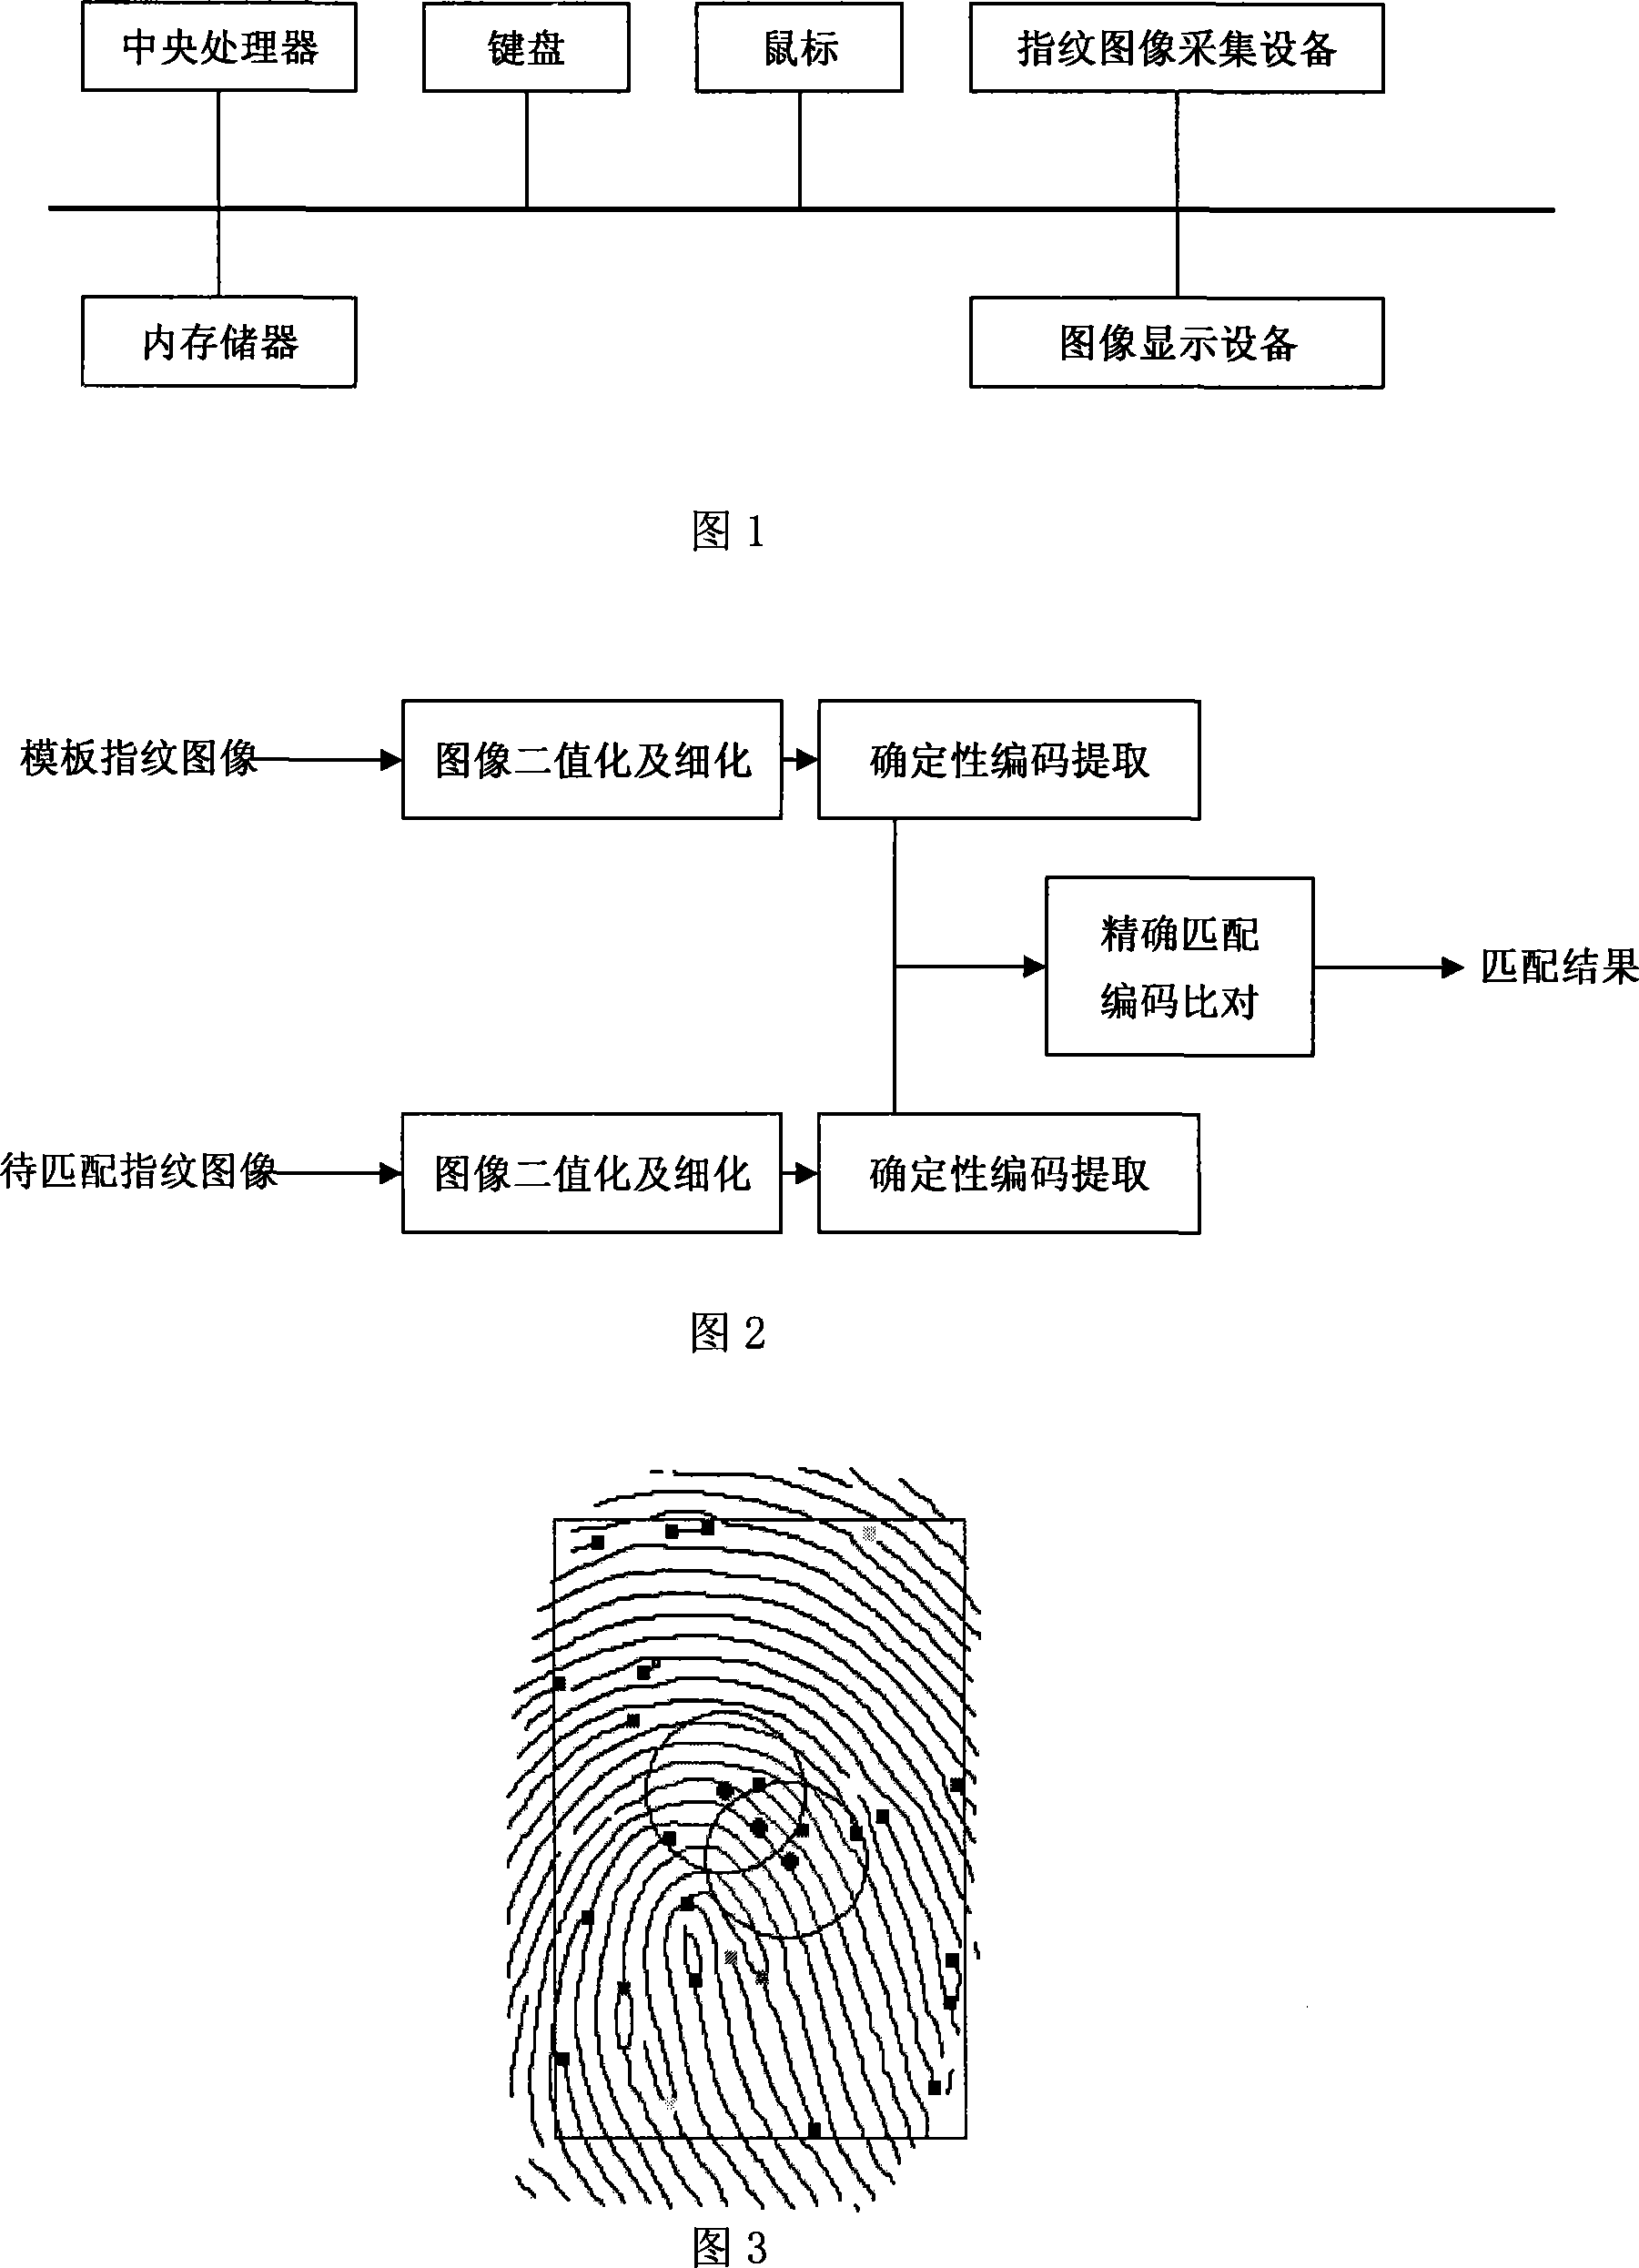 Certainty coding method and system in fingerprint identification